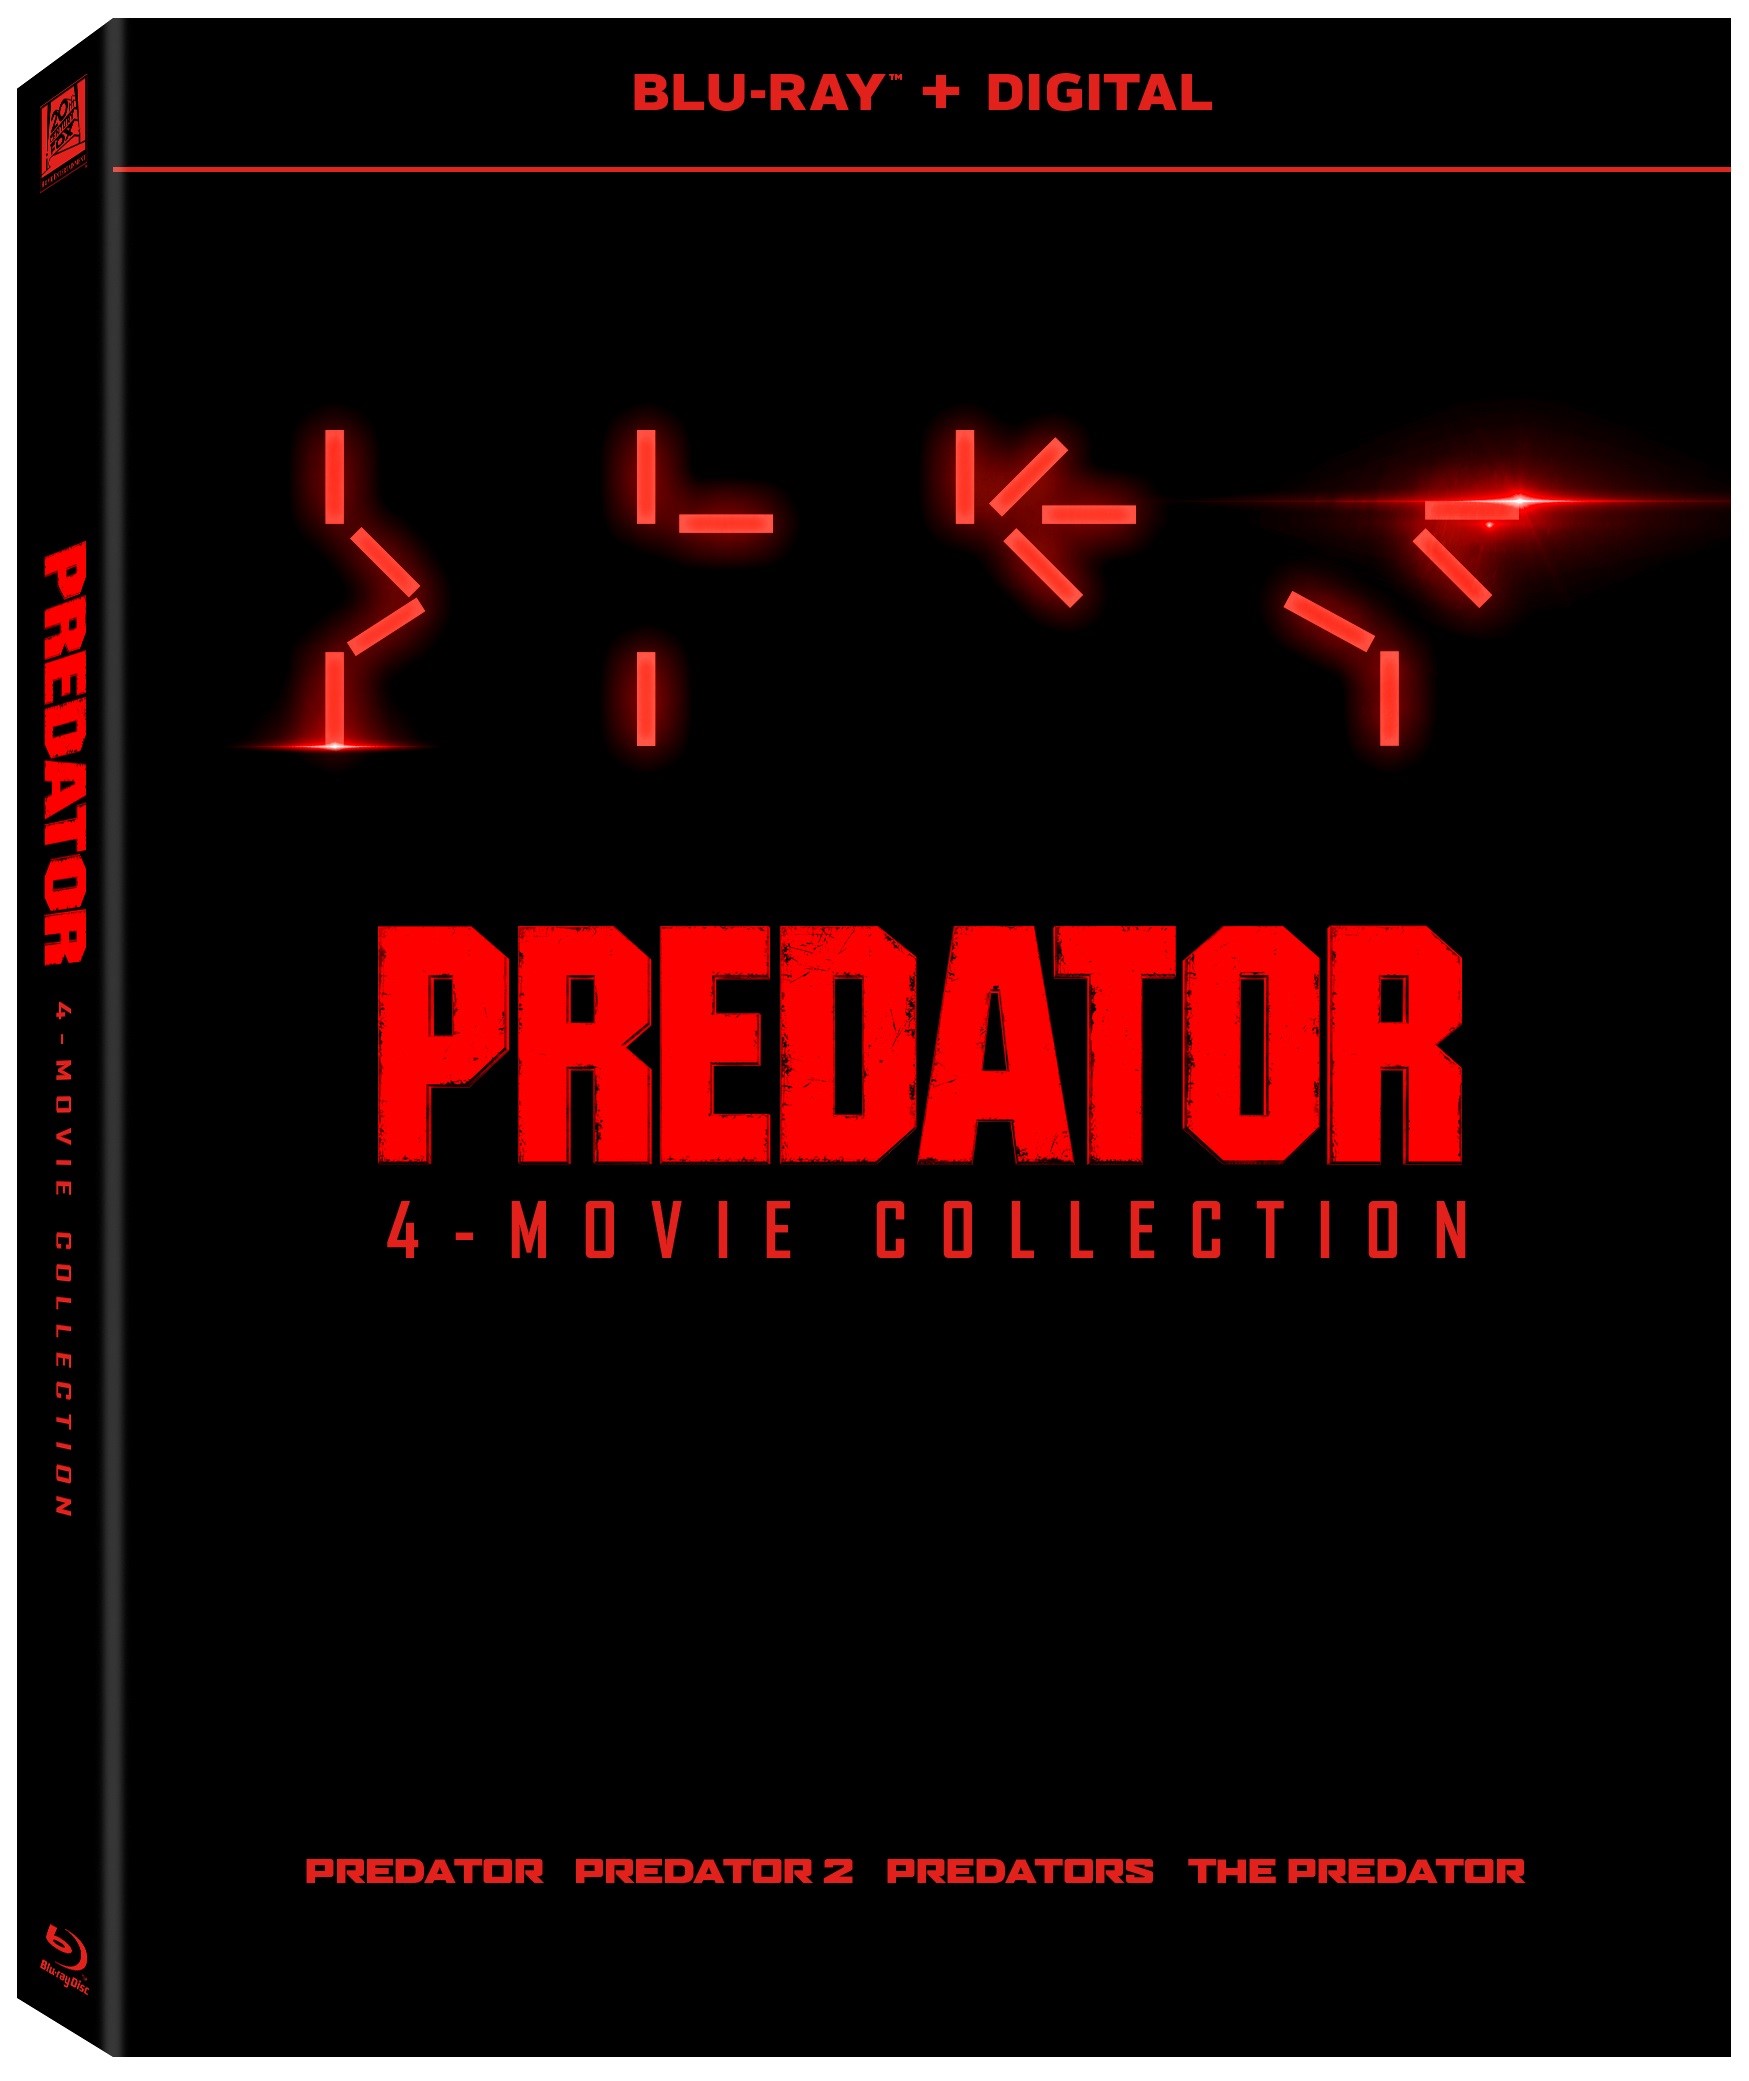 THE PREDATOR Holiday Special and 4K Ultra HD Blu-ray Arrives